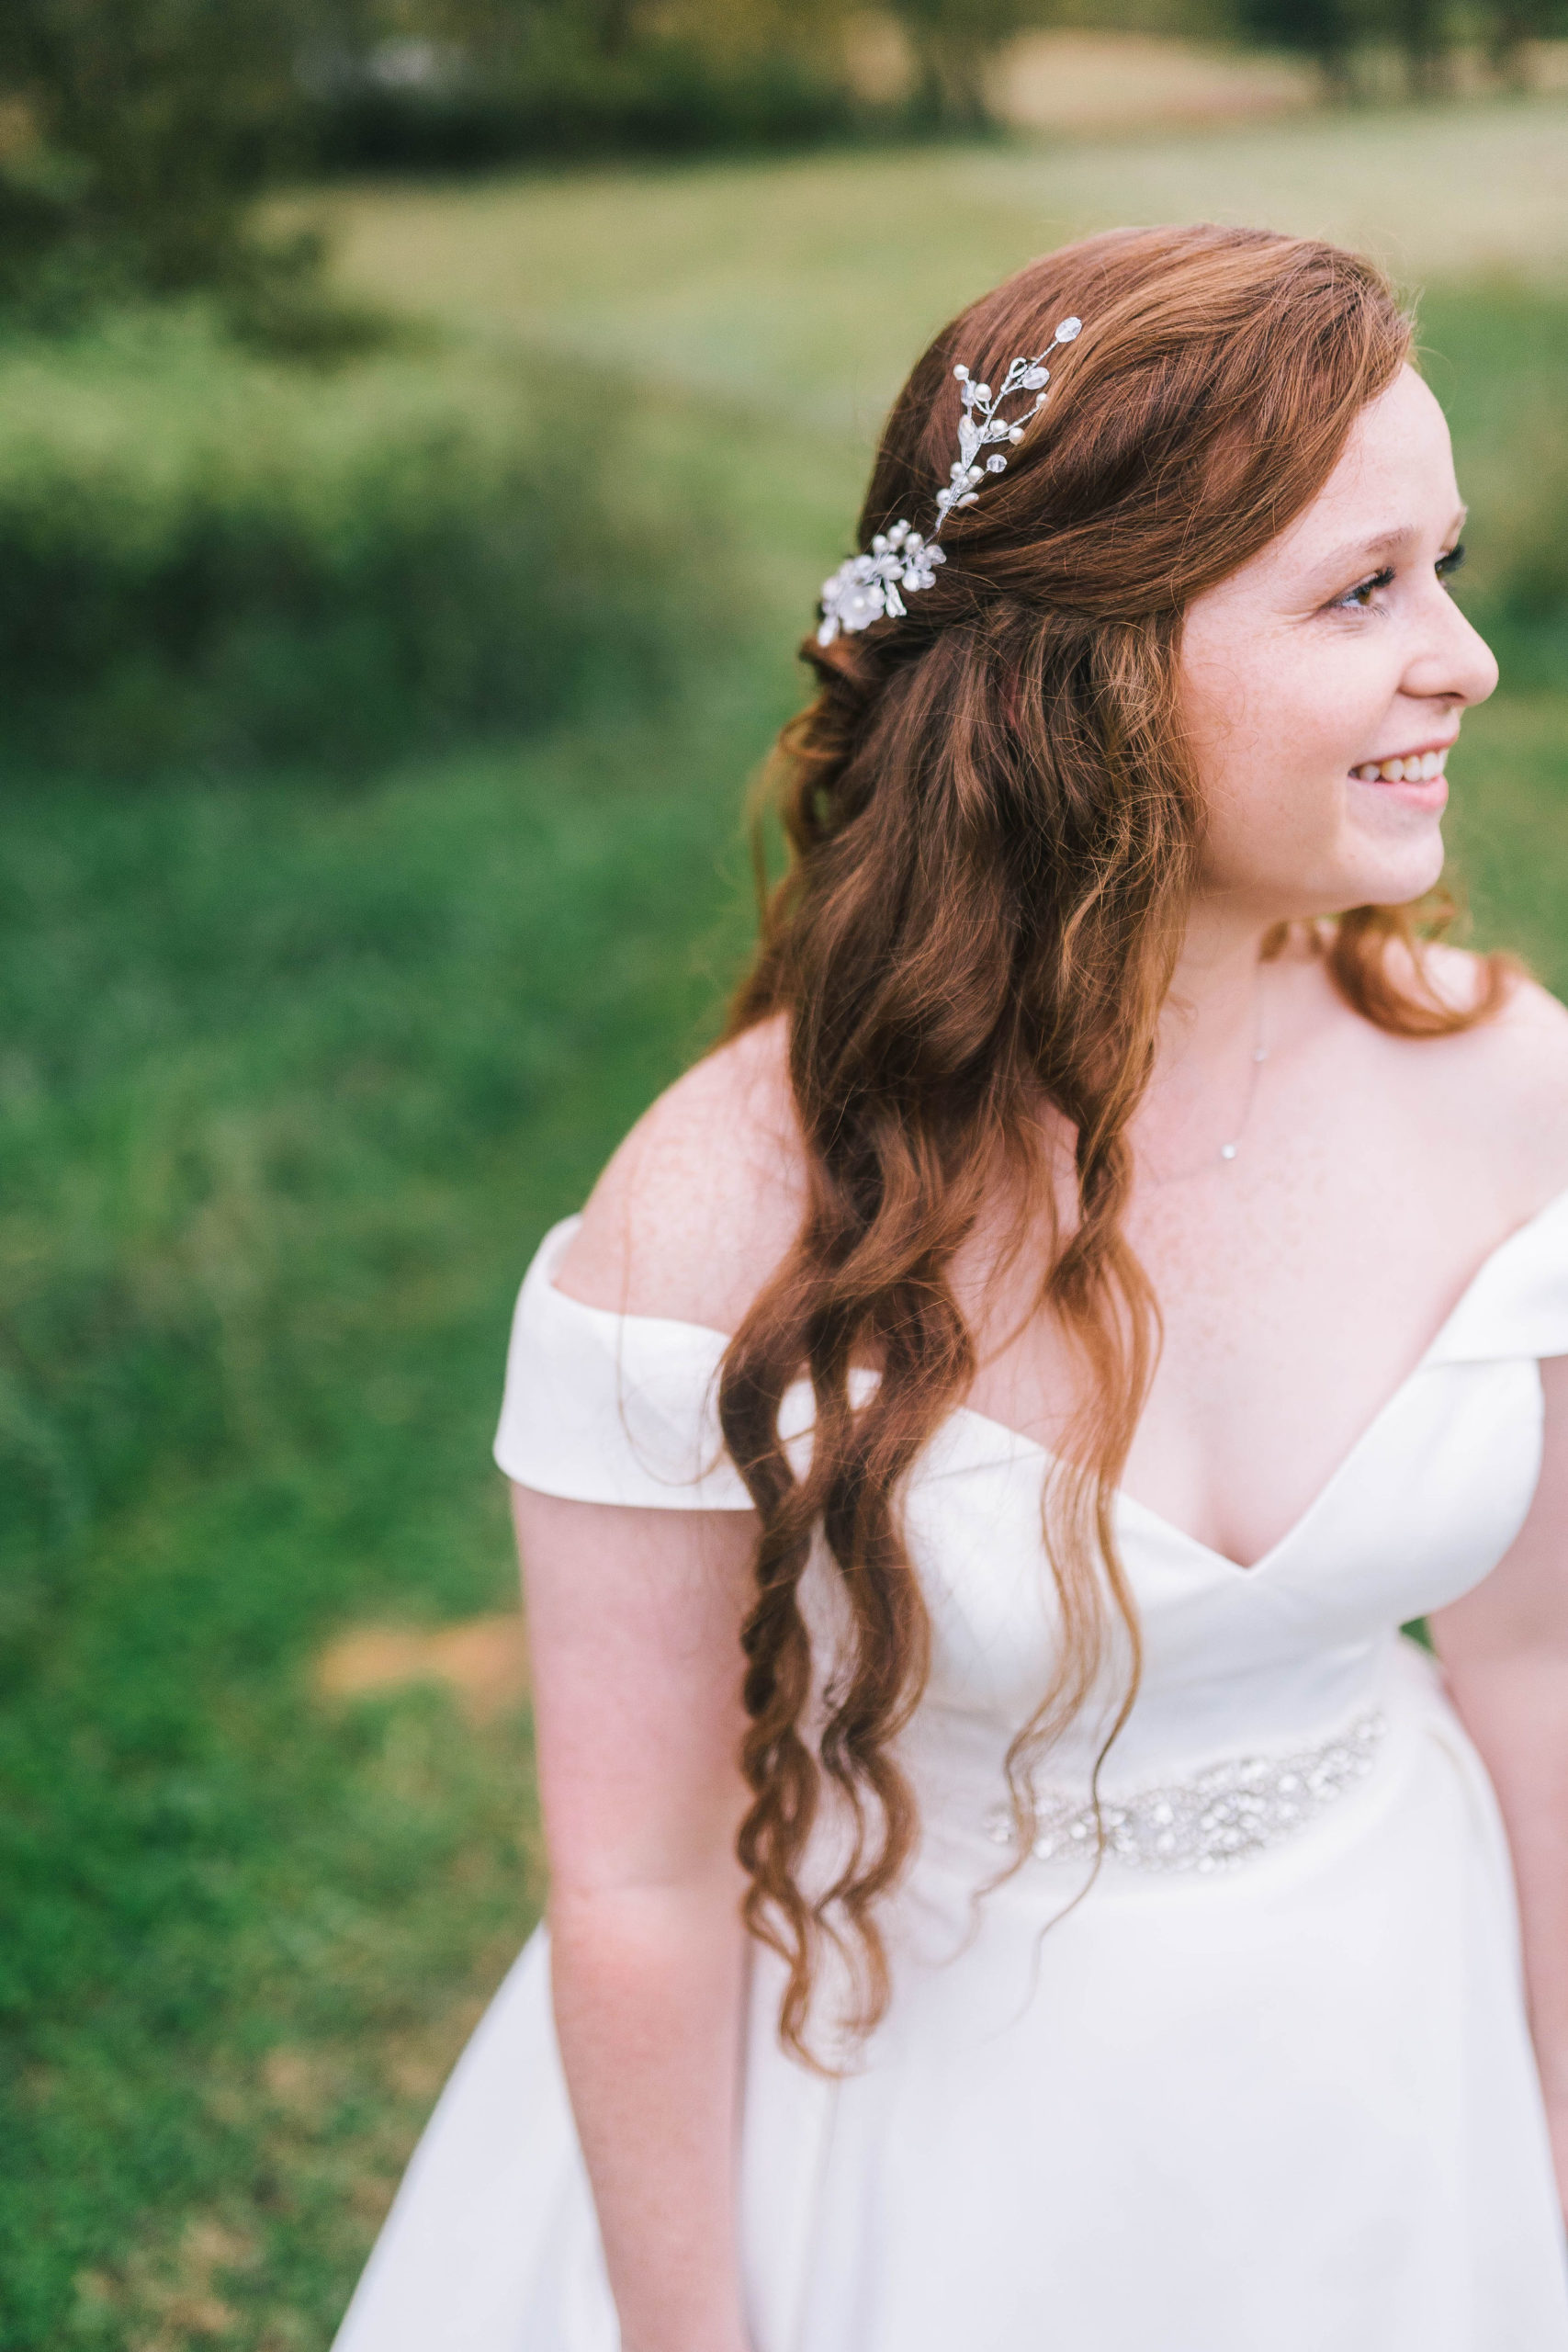 Sacramento wedding photographer captures gorgeous shot of a red headed bride on her wedding day. Off the shoulder white satin gown with a beautiful crystal waist detail.